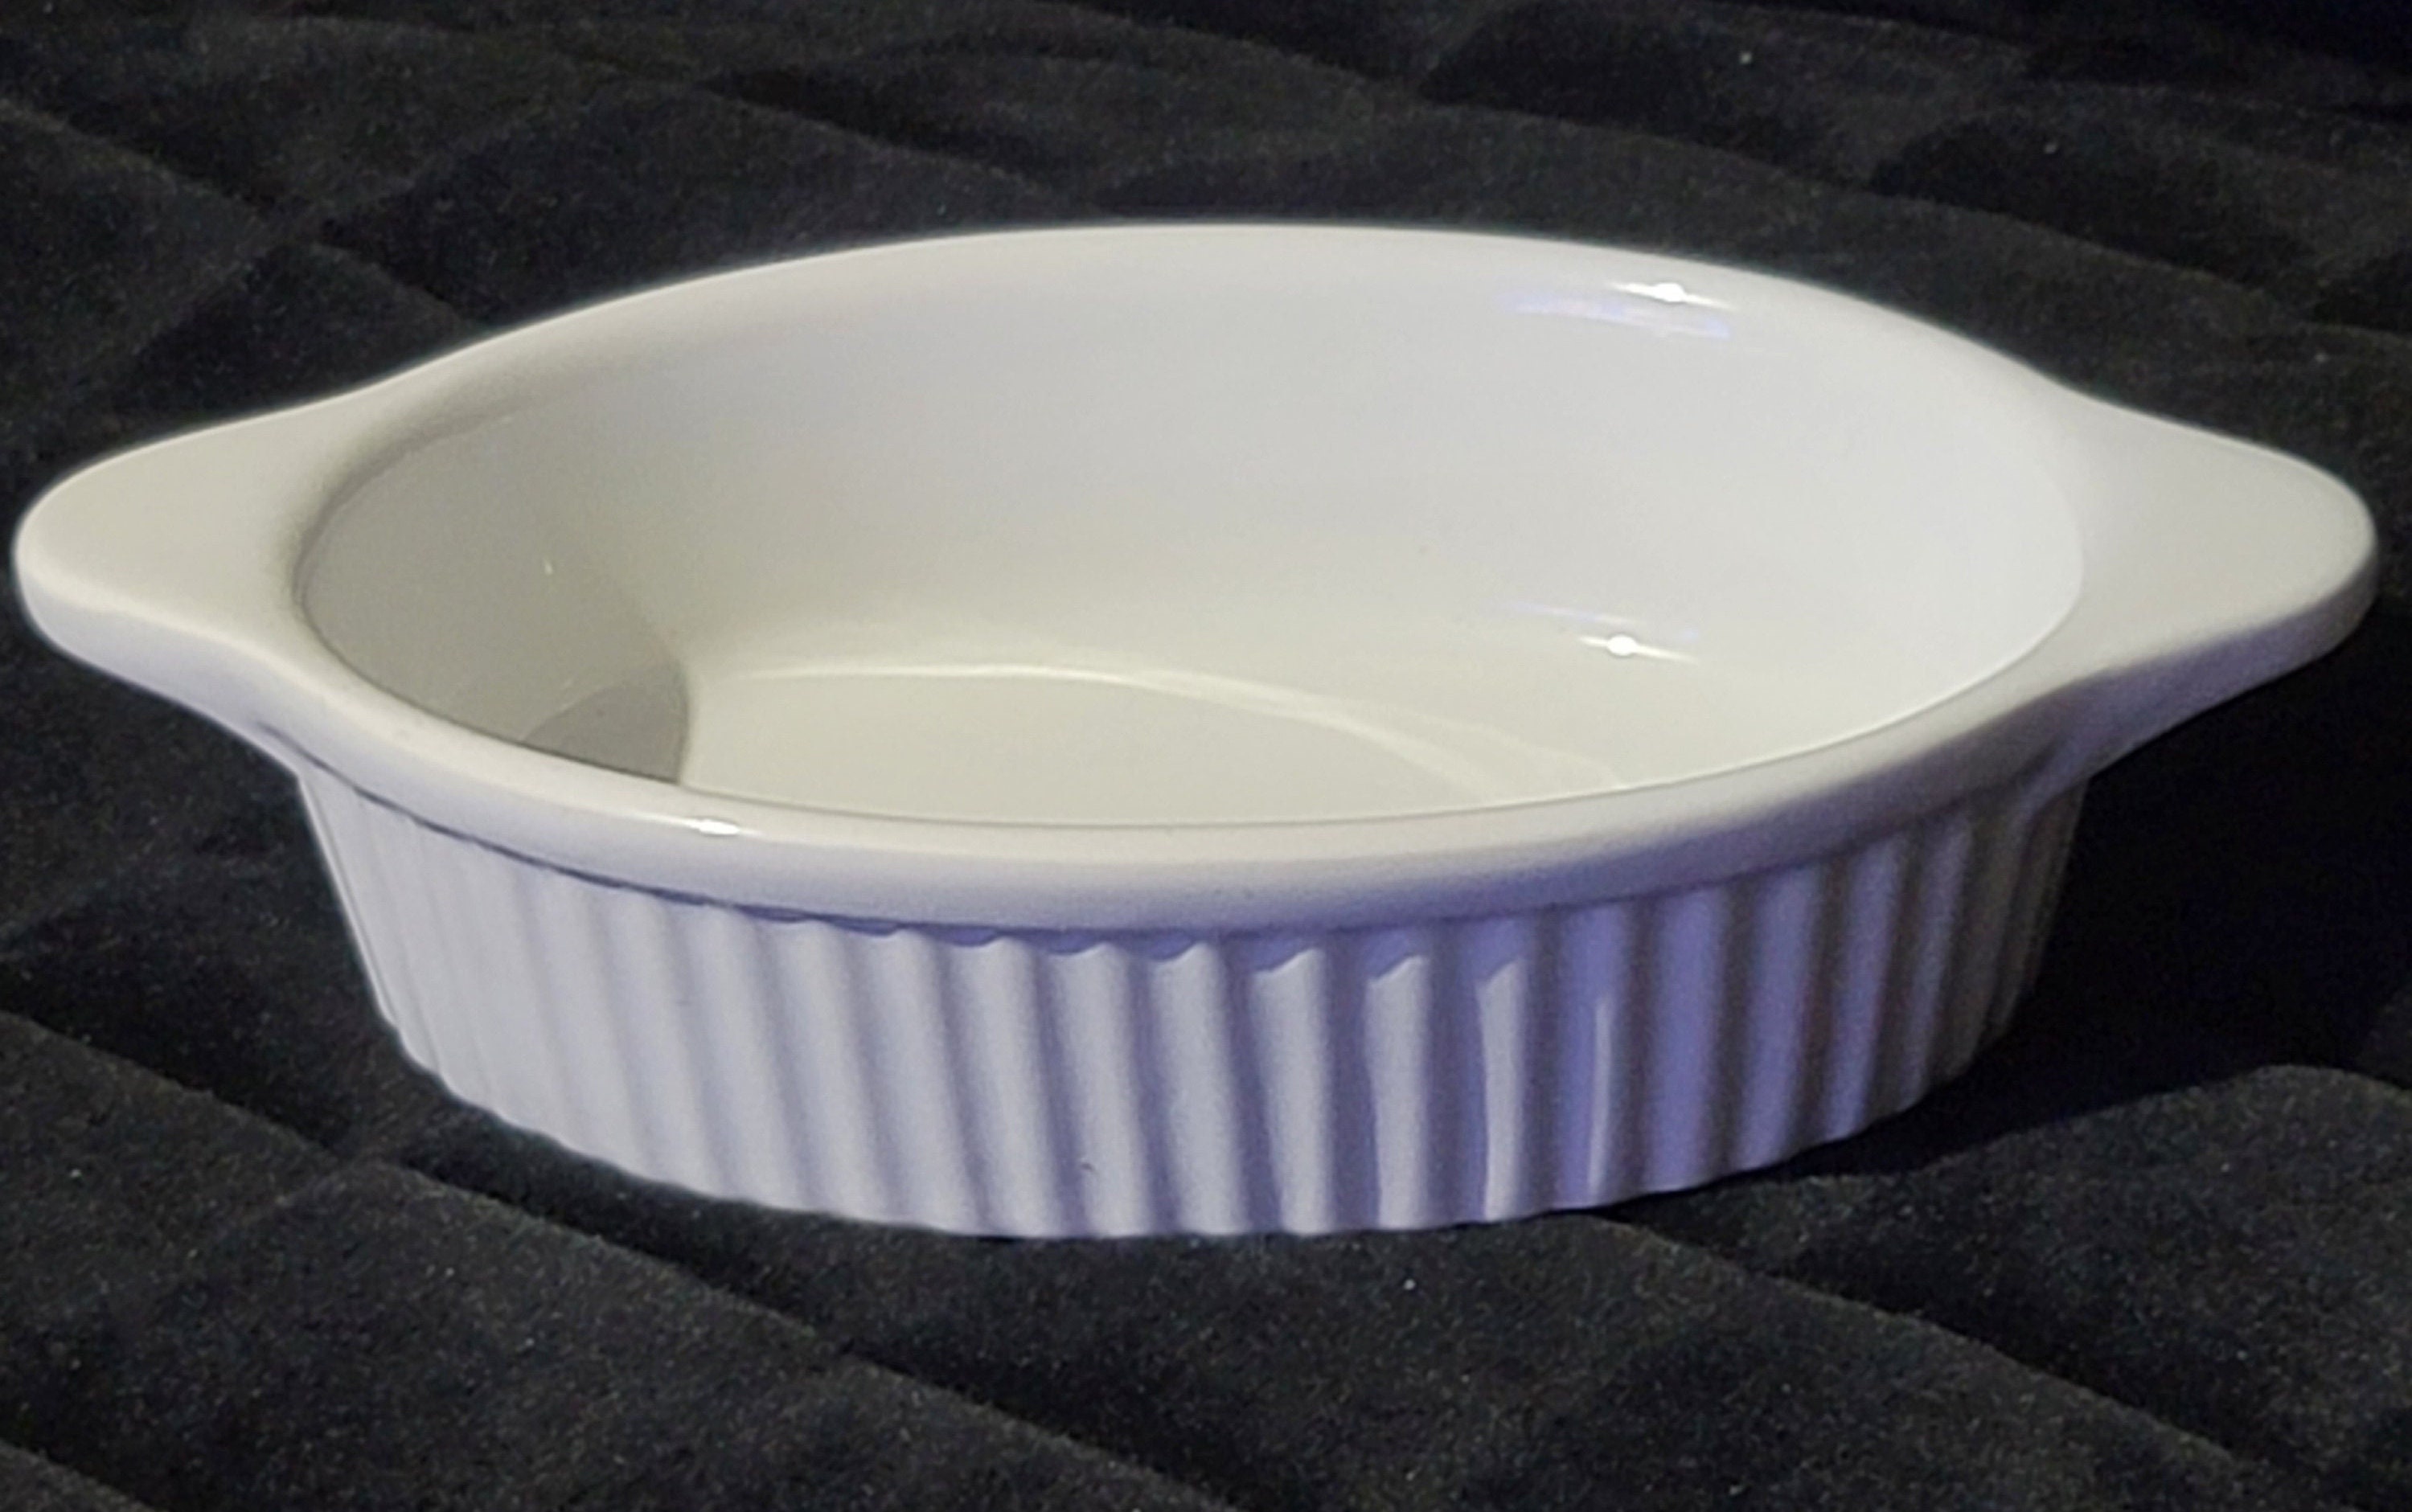 25 2 Oz Clear Oval Plastic Souffle / Portion Cups and Lids 